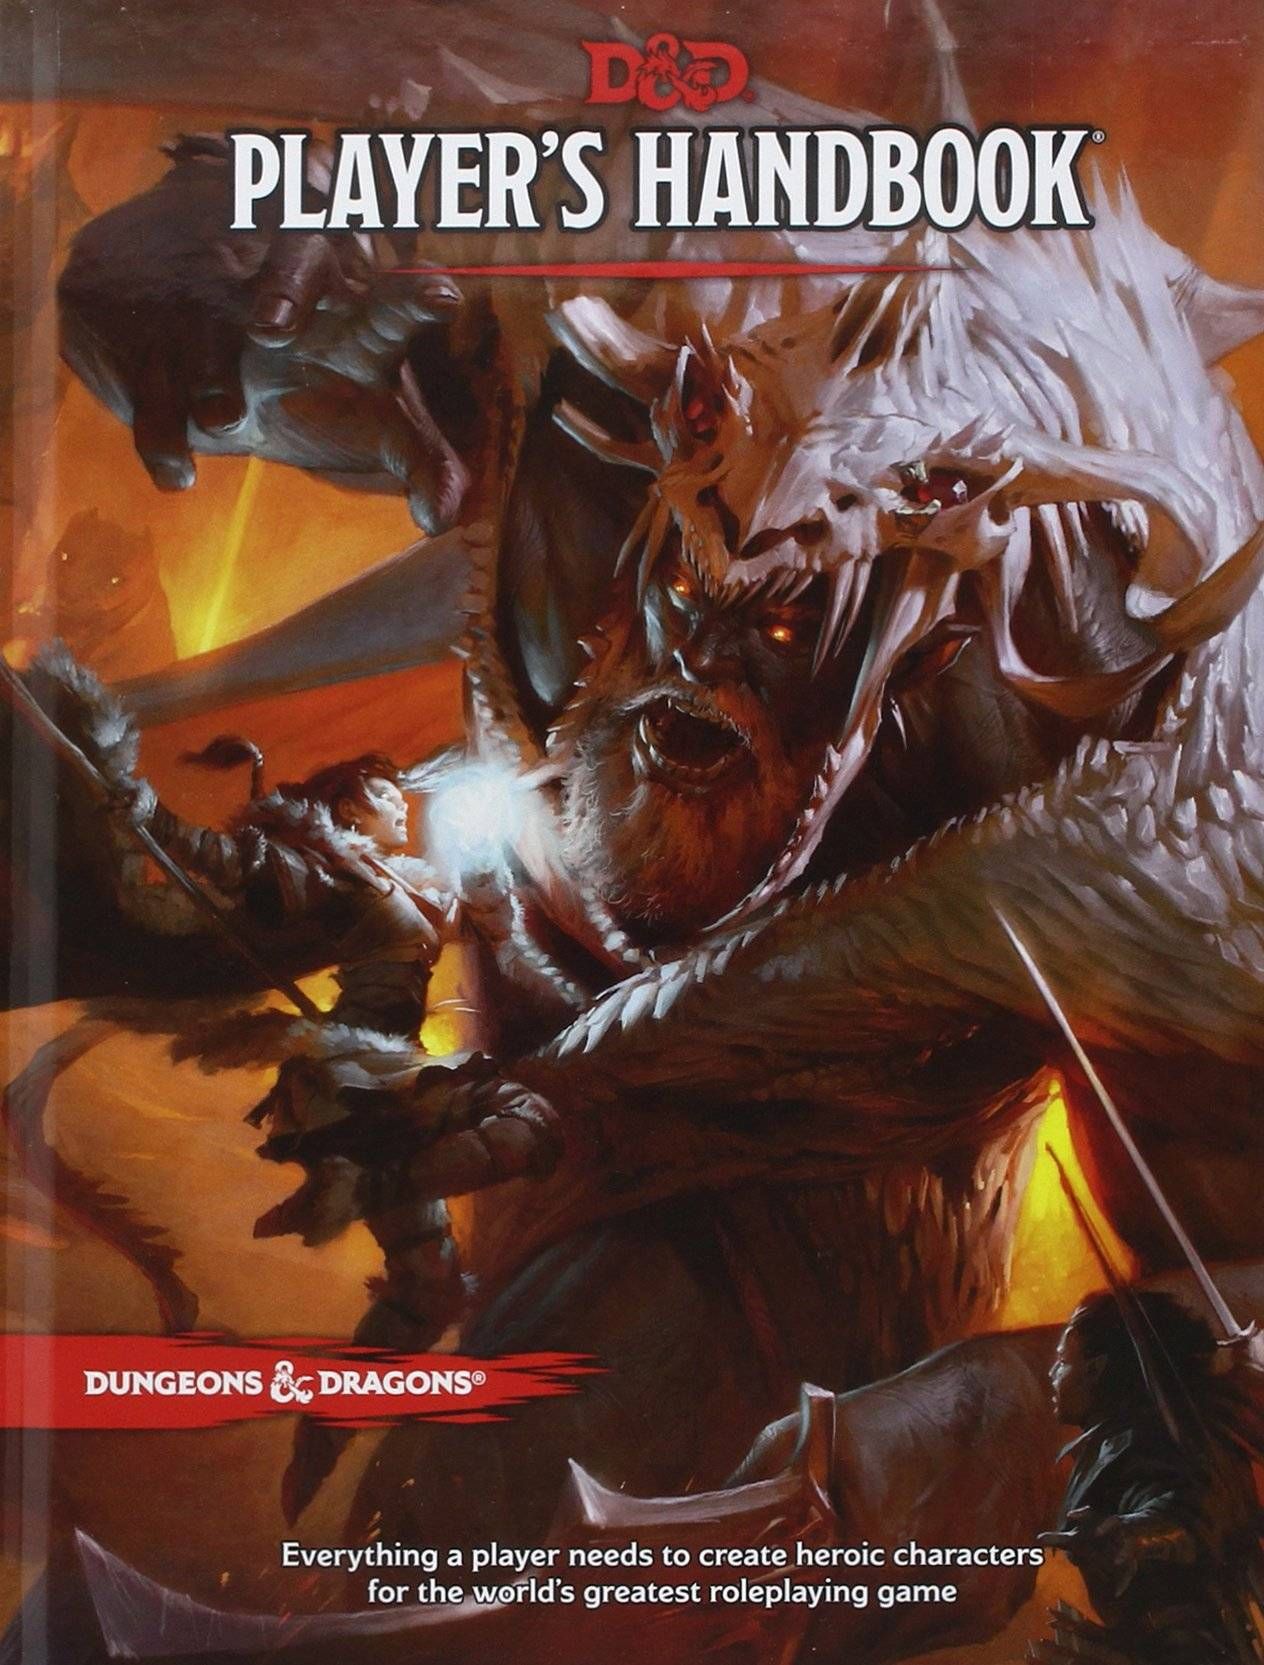 Cover of the Player's Handbook